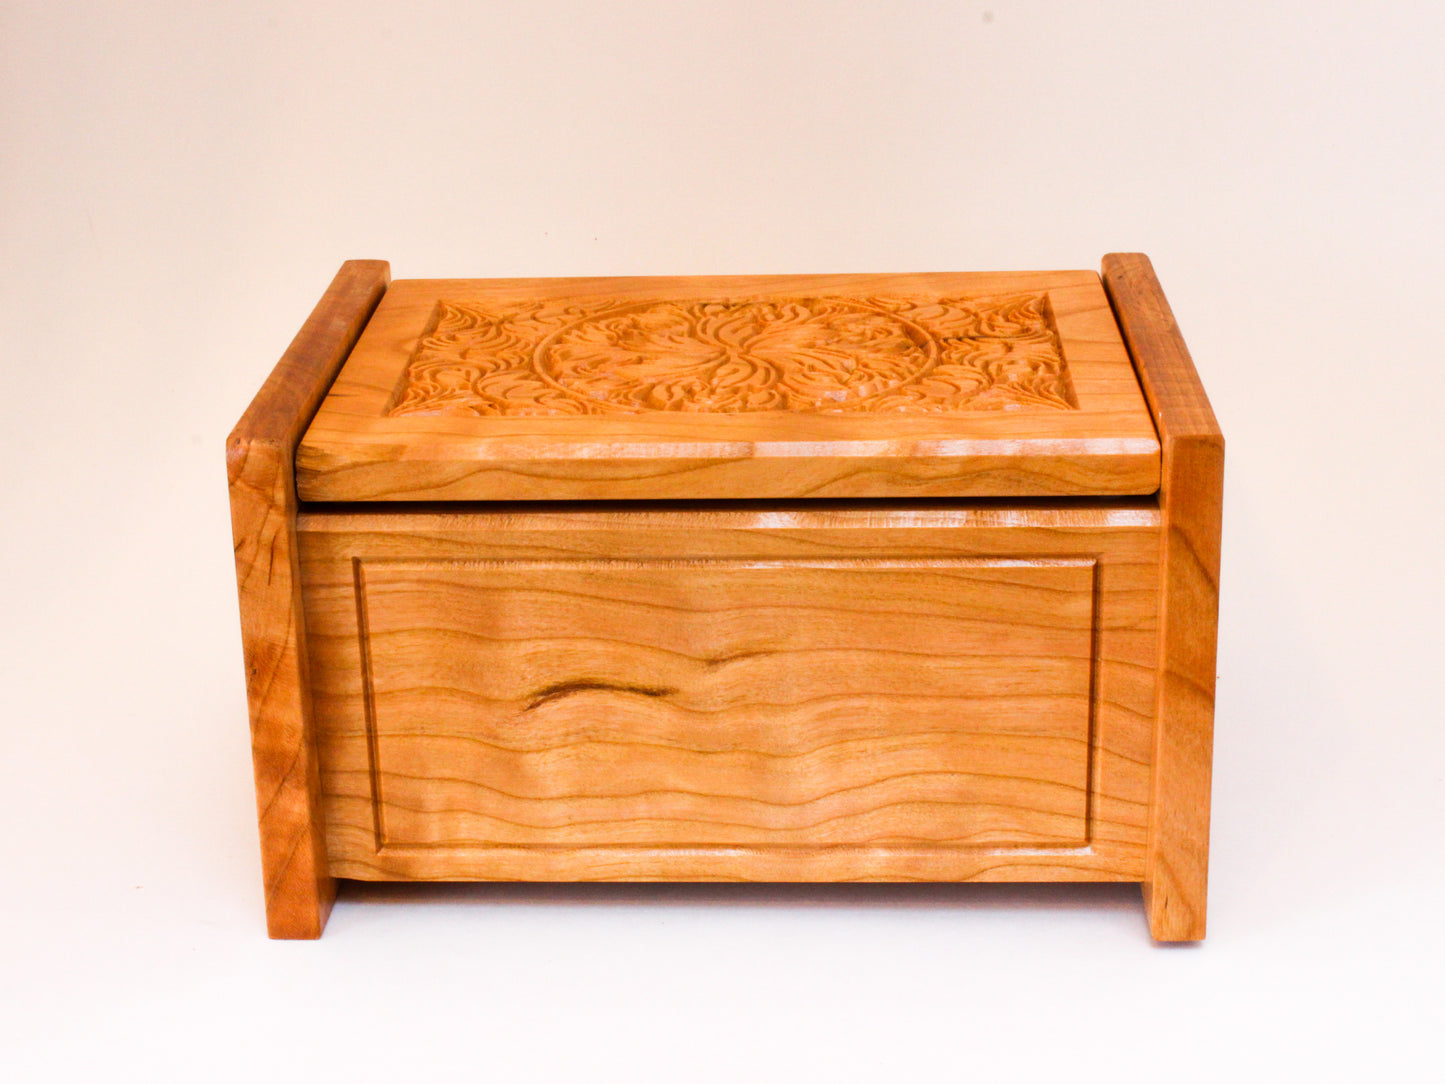 Front view of wooden keepsake box: top can be engraved with name or initials or any design you wish